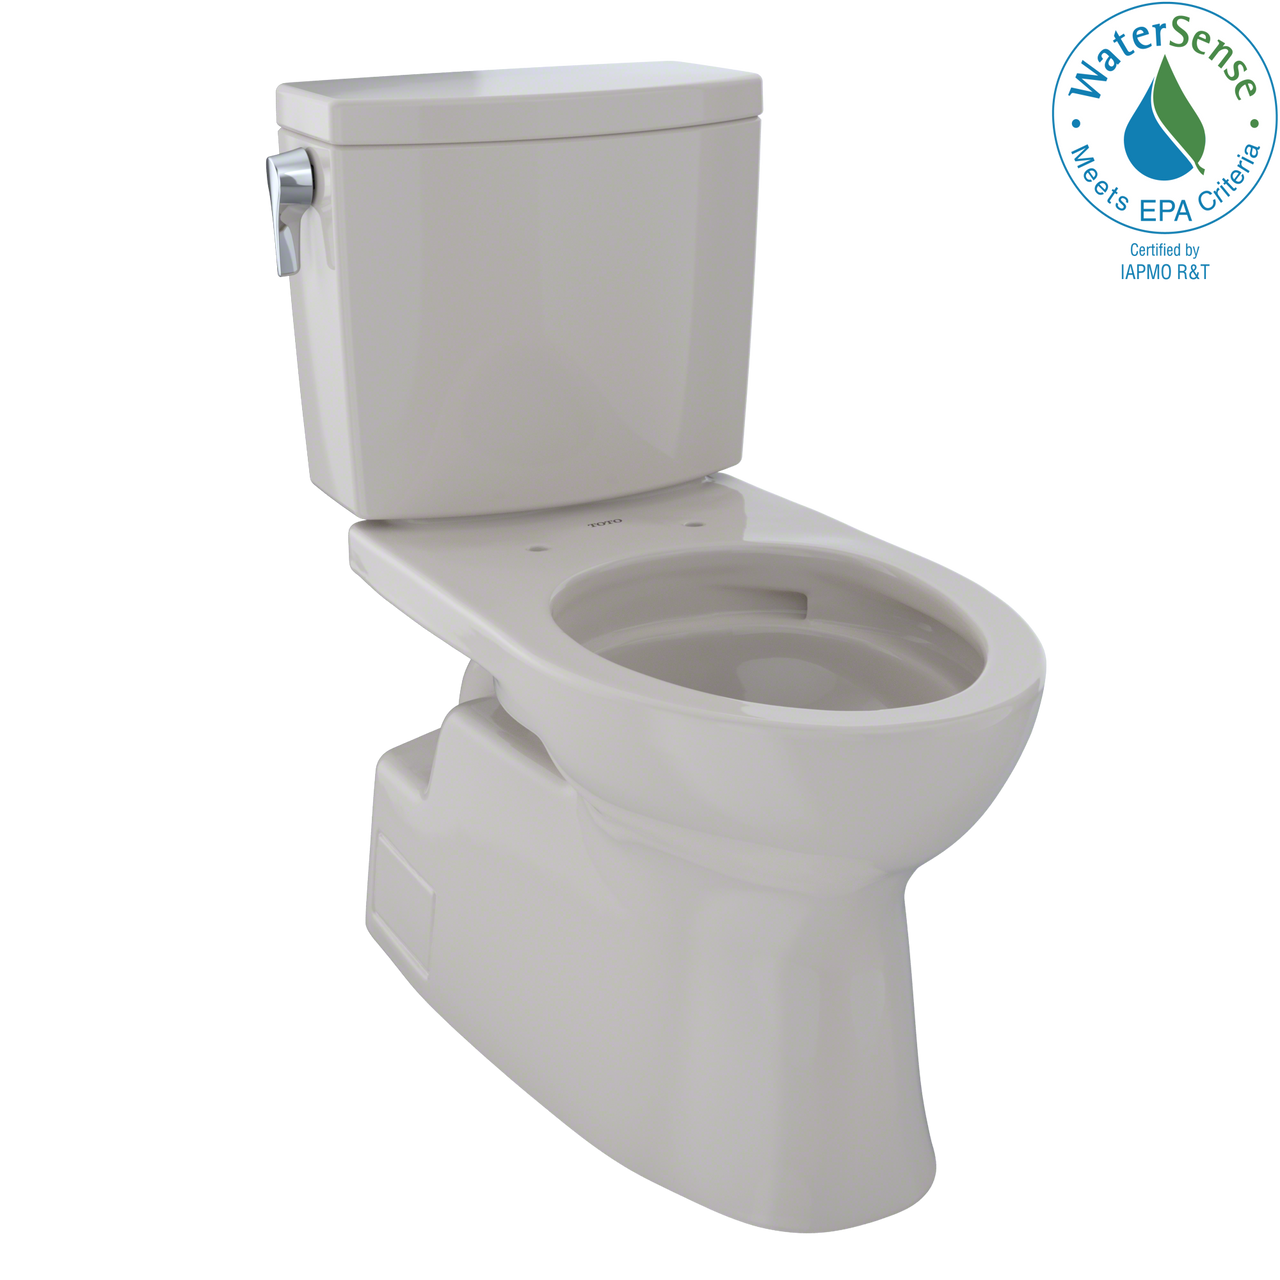 TOTO Vespin II 1G Two-Piece Elongated 1.0 GPF Universal Height Skirted Design Toilet with CeFiONtect,  - CST474CUFG#12 - BNGBath